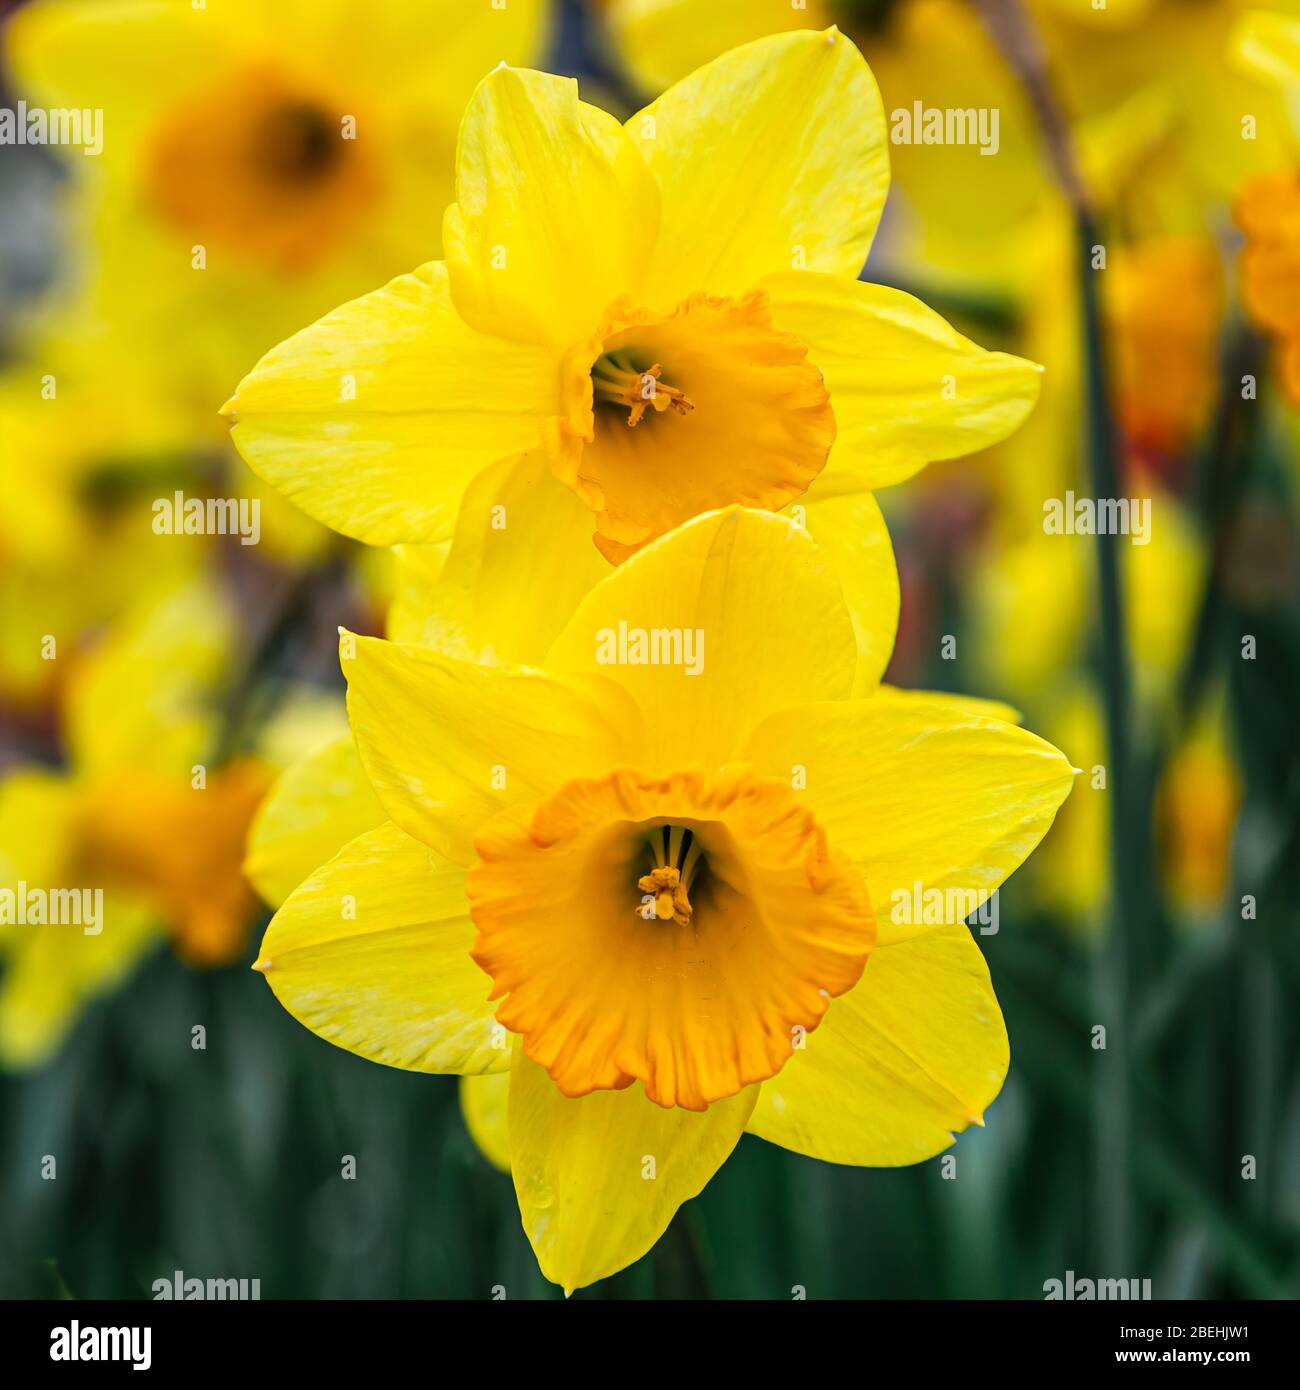 Close up of two yellow daffodils (genus Narcissus), plants of the amaryllis family. Stock Photo